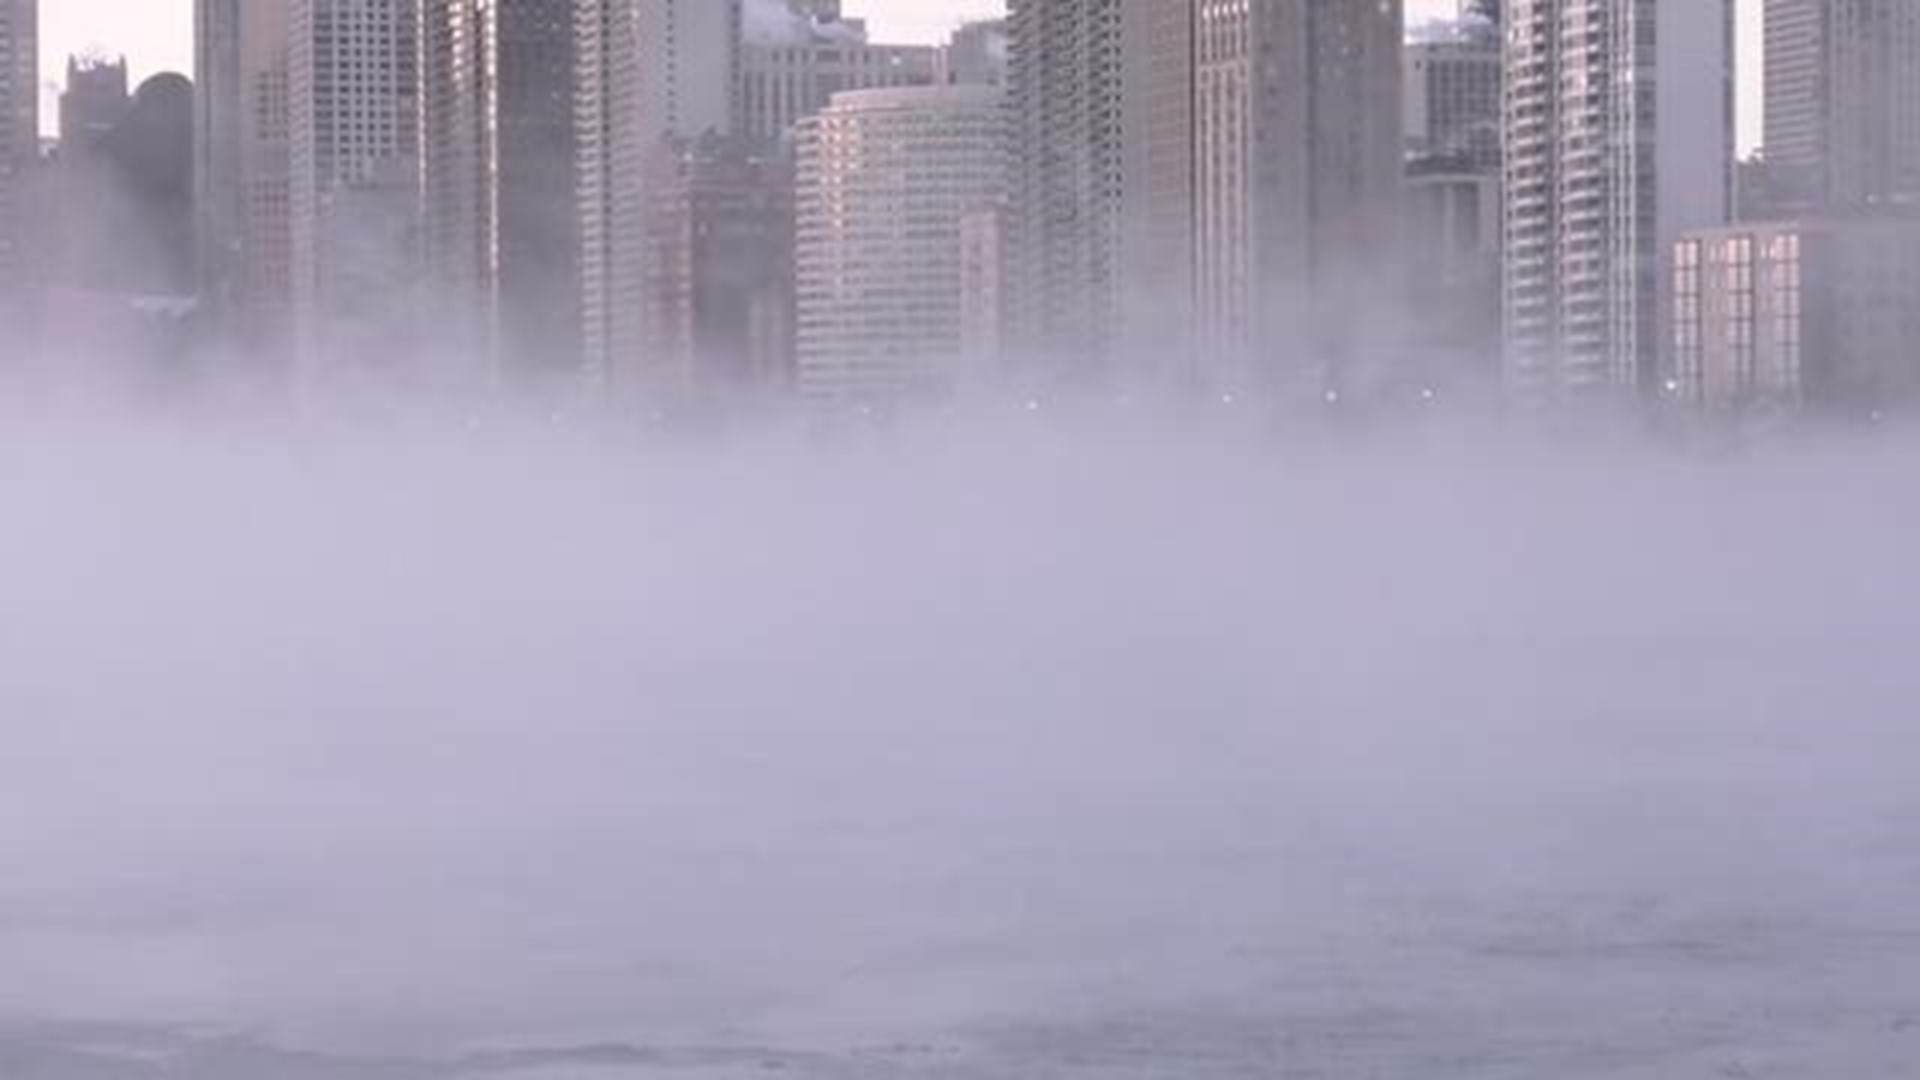 AccuWeather news reporter Jonathan Petramala shows just how cold it is in Chicago as a Polar Vortex plunges much of the upper Midwest into below zero temperatures.